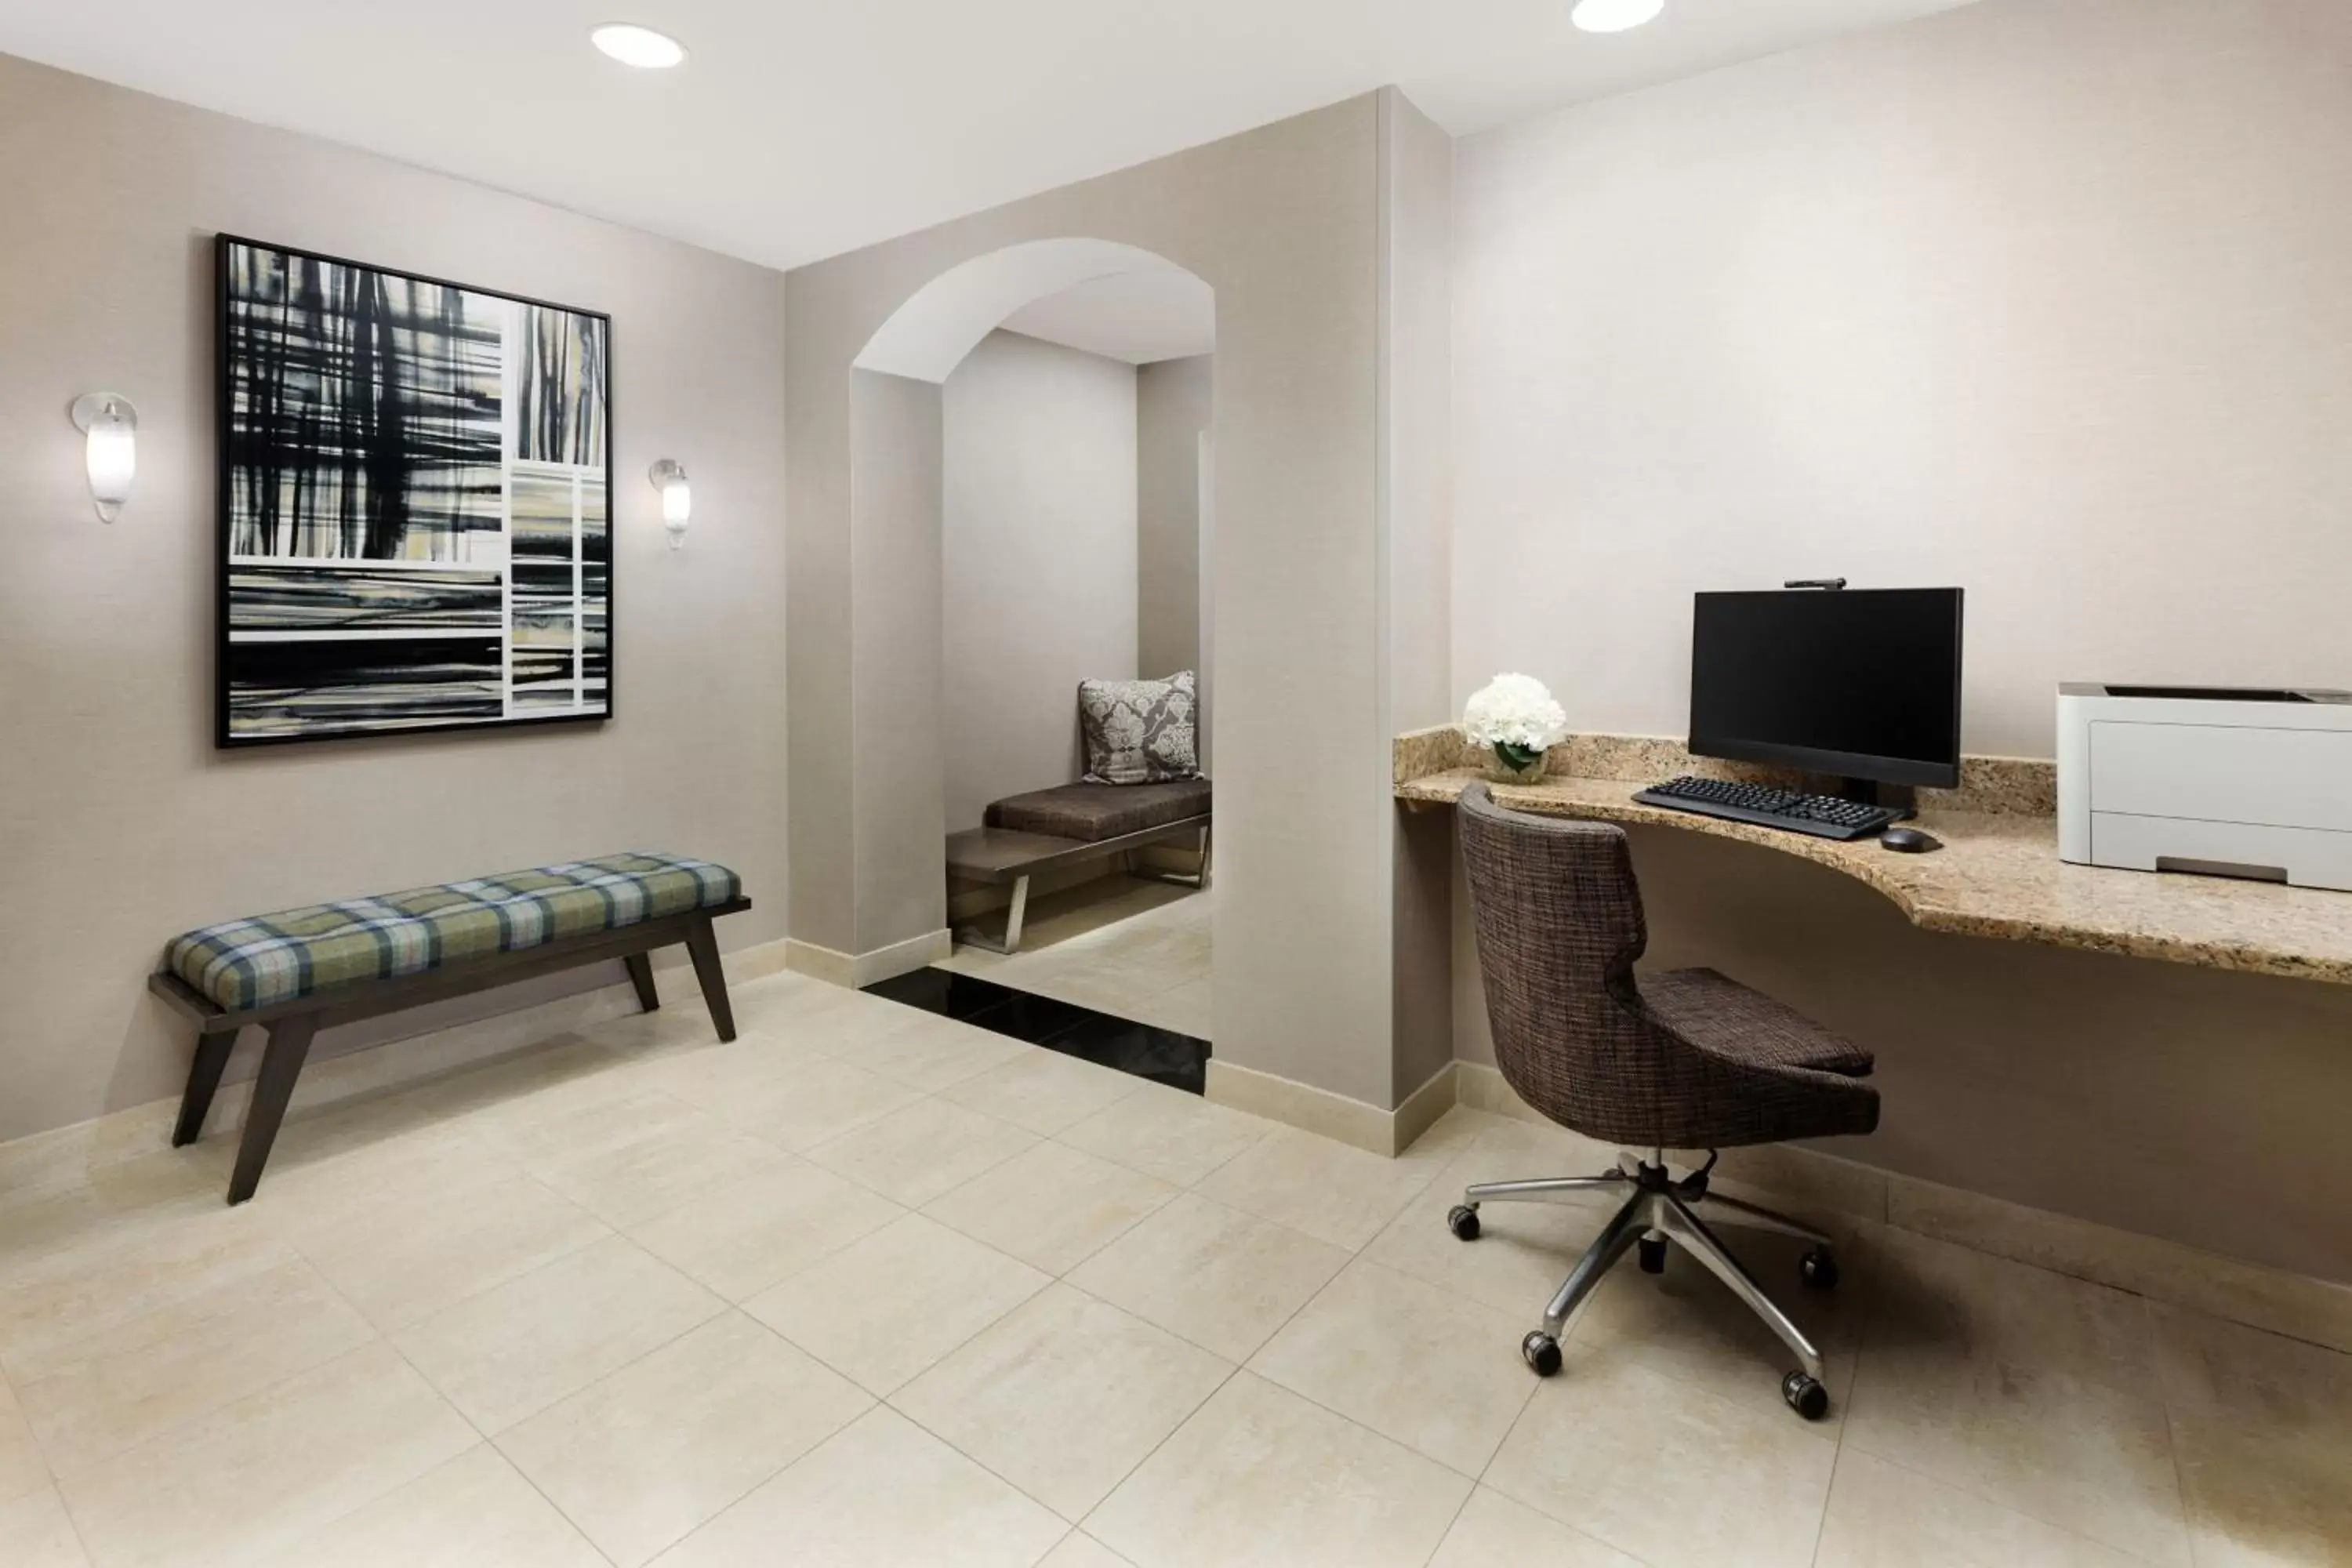 Business facilities in Residence Inn Saddle River